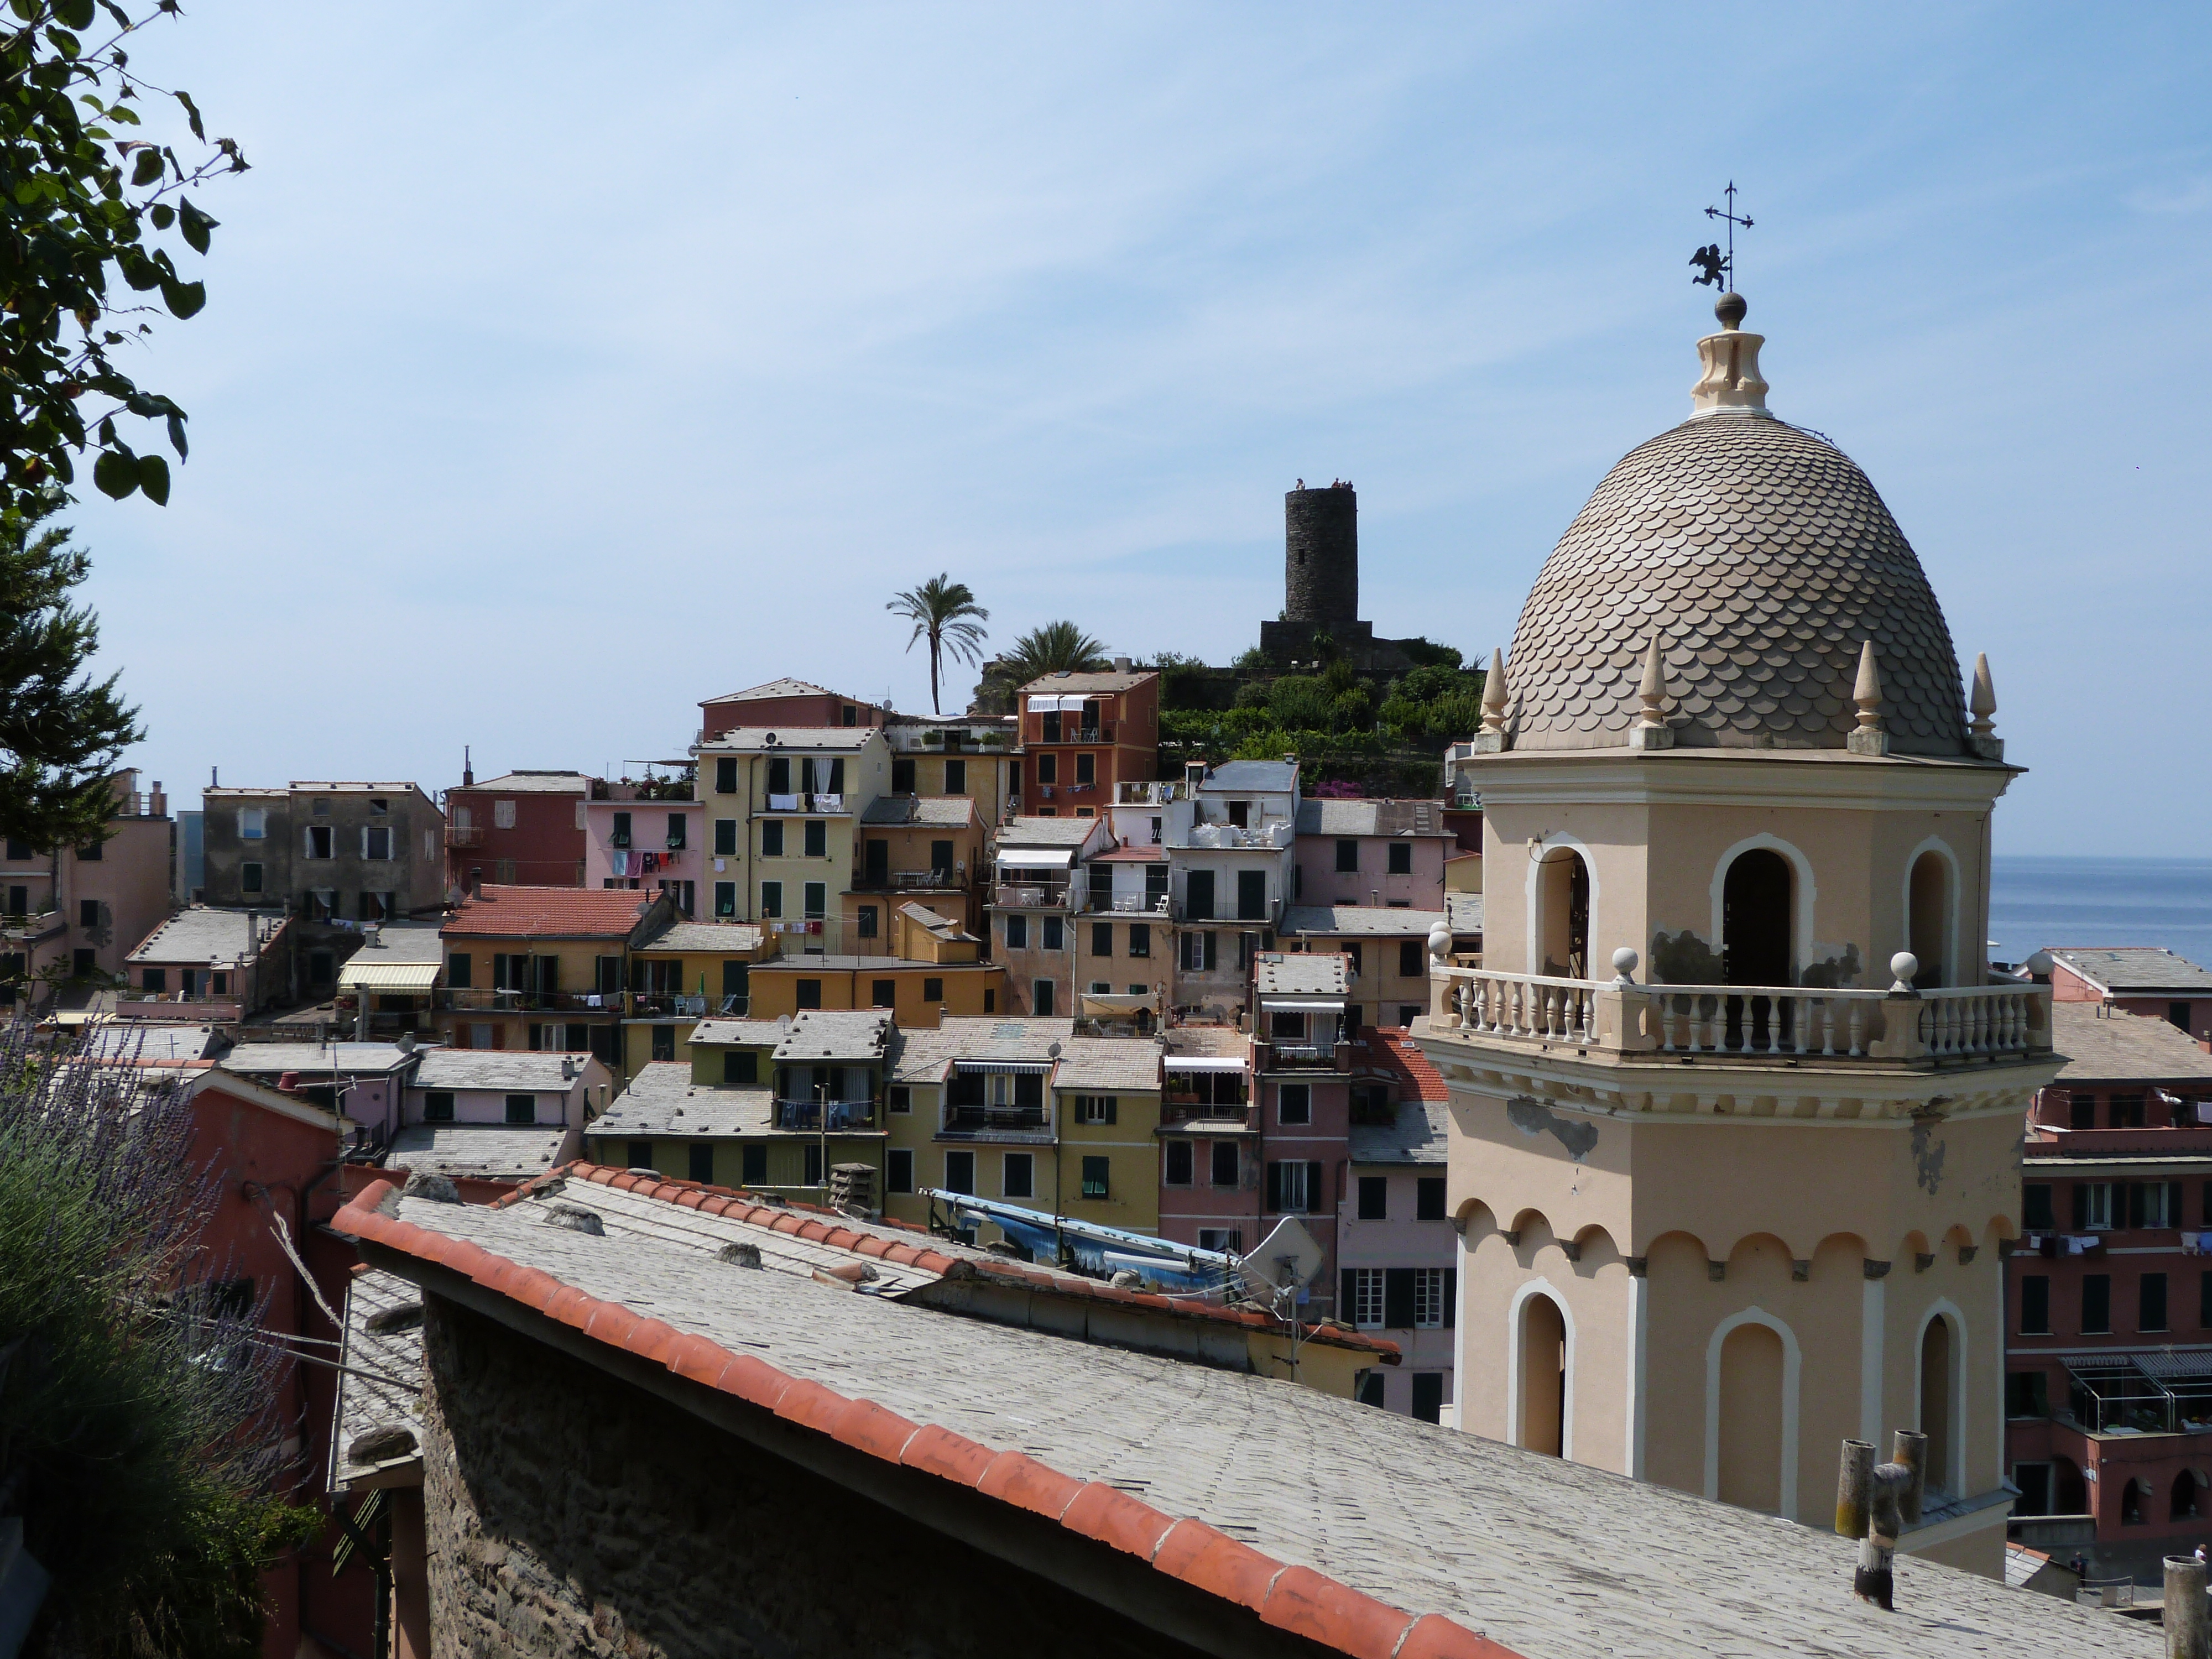 Rooftops of Vernazza